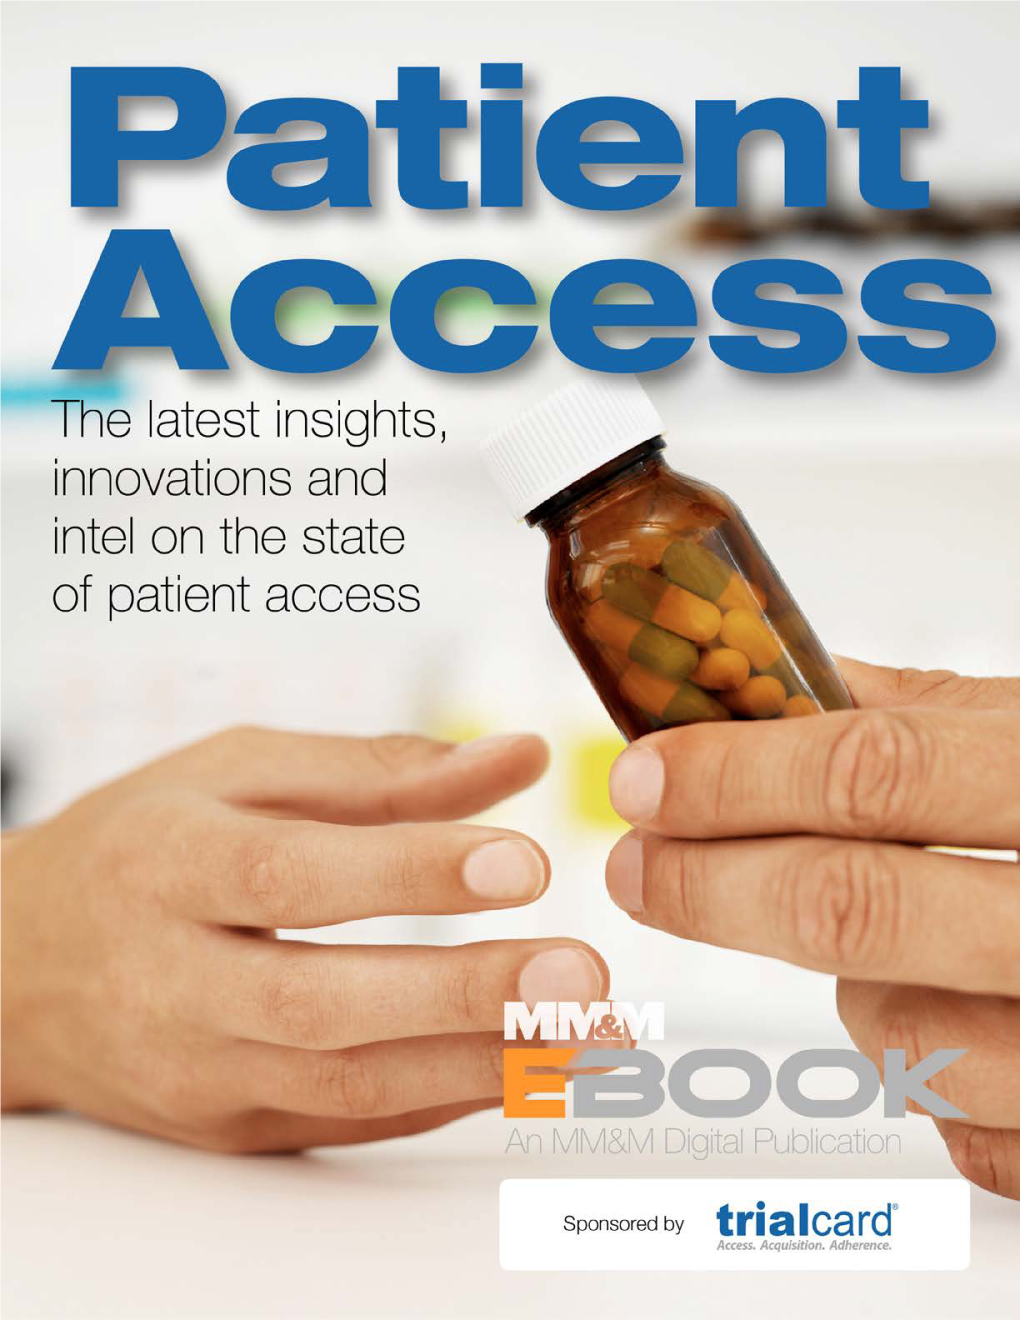 Trialcard Patient Access Programs Deliver. Do Yours?